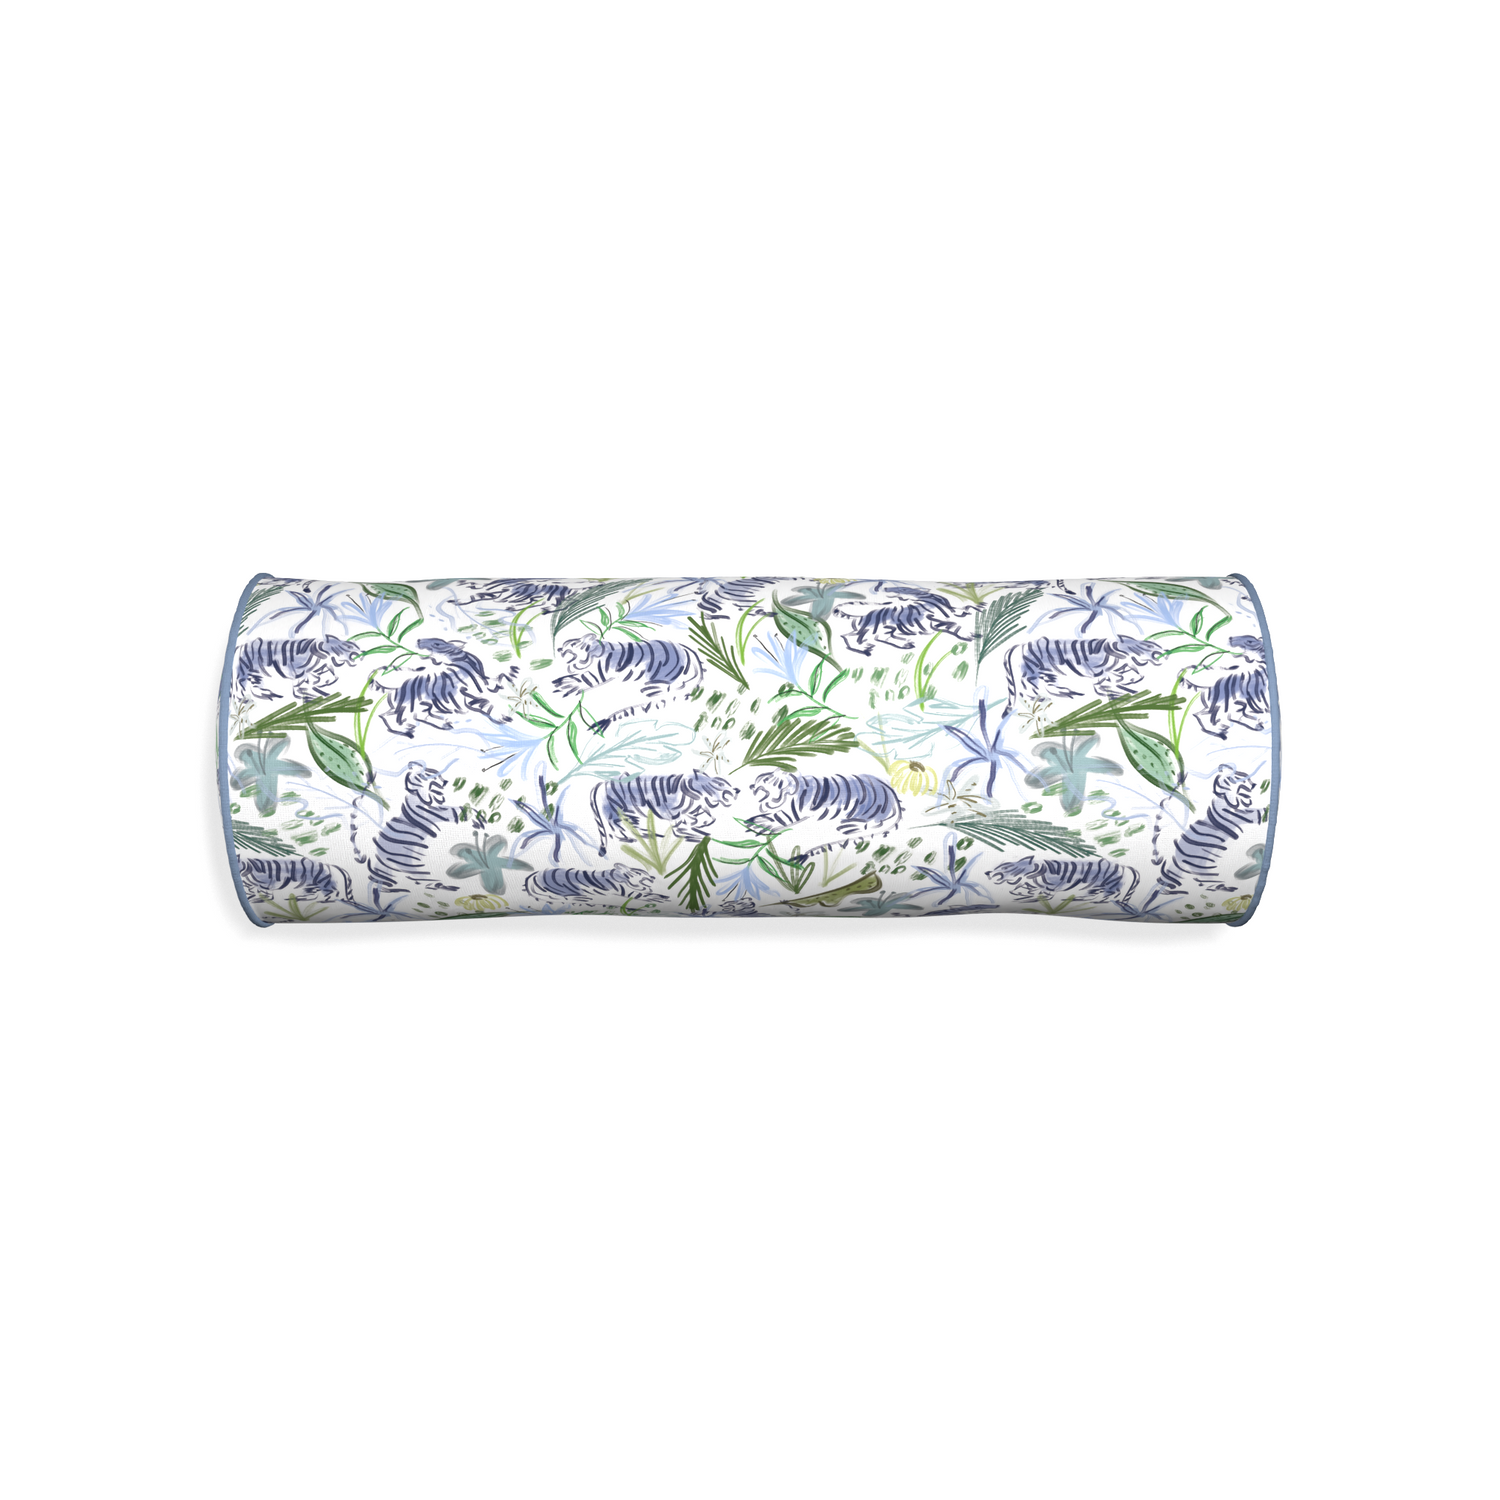 Bolster frida green custom green tigerpillow with sky piping on white background